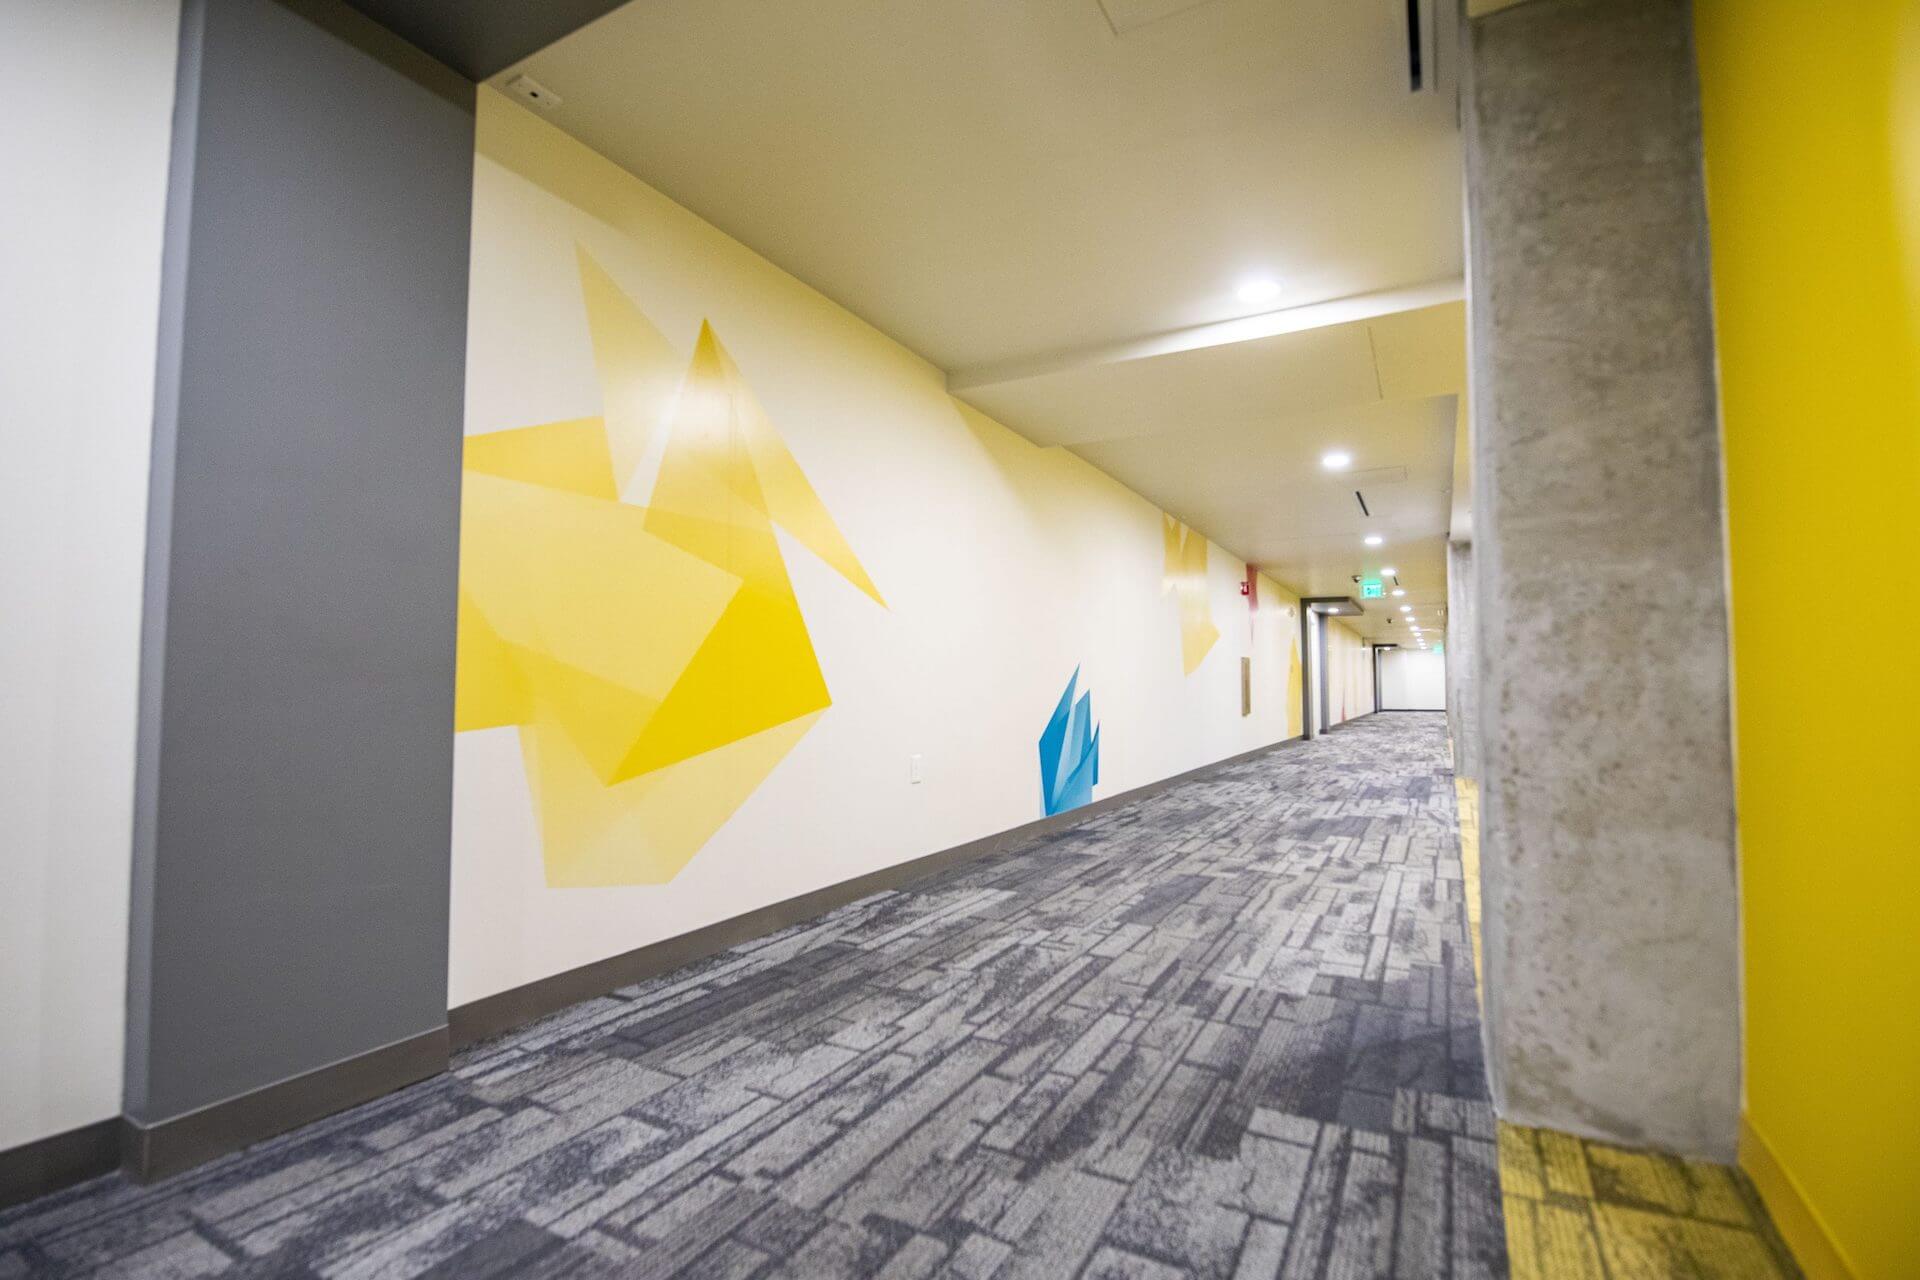 A large hallway with yellow and blue pattern on walls